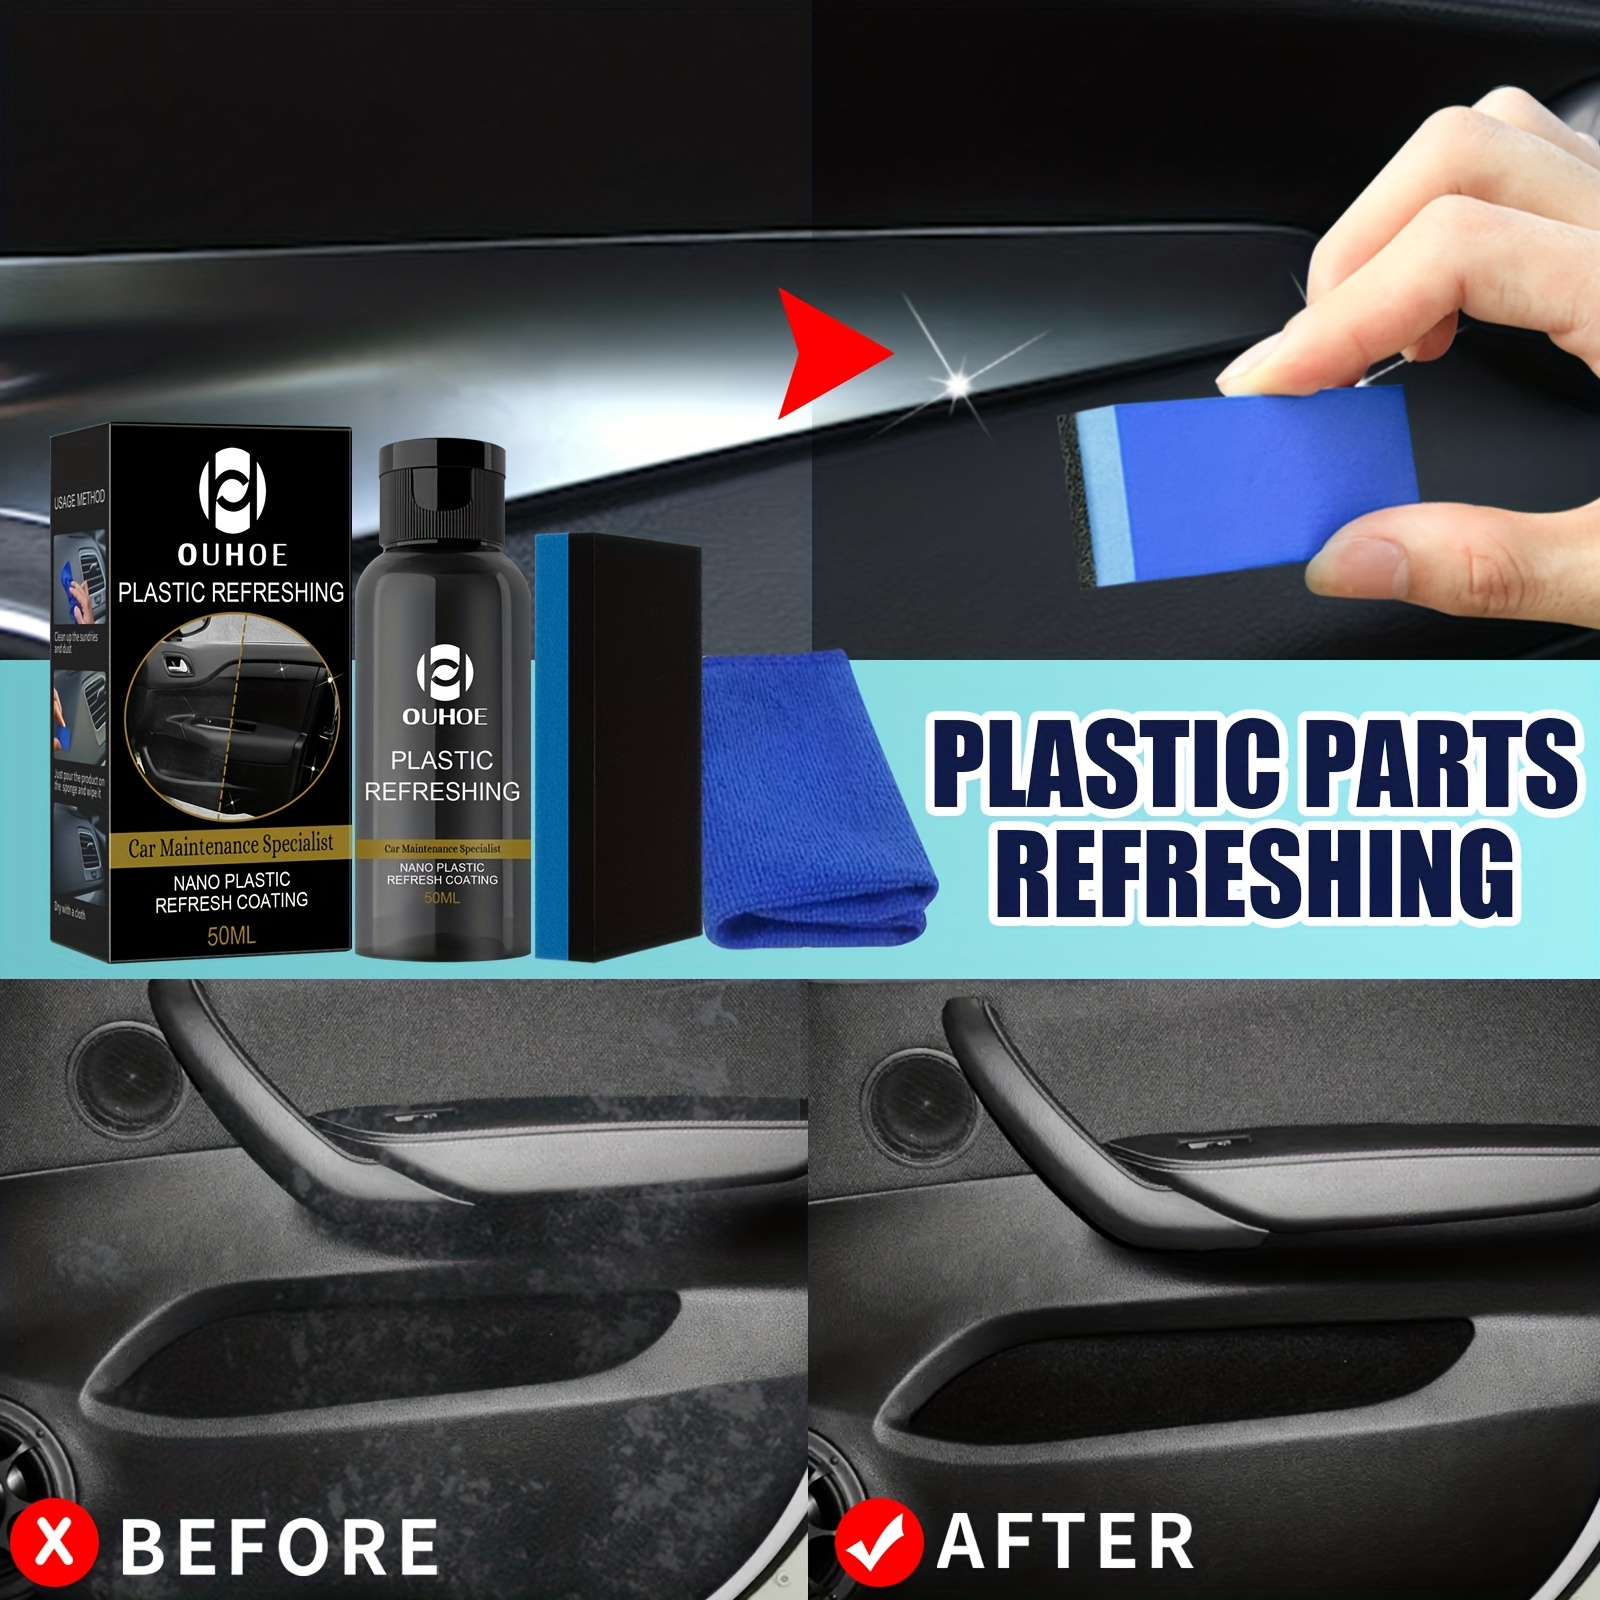 Plastic Restorer for Cars Ceramic Plastic Coating Trim Restore, Resists  Water, UV Rays, Dirt, Ceramic Coating, Not Dressing, Highly Concentrated 